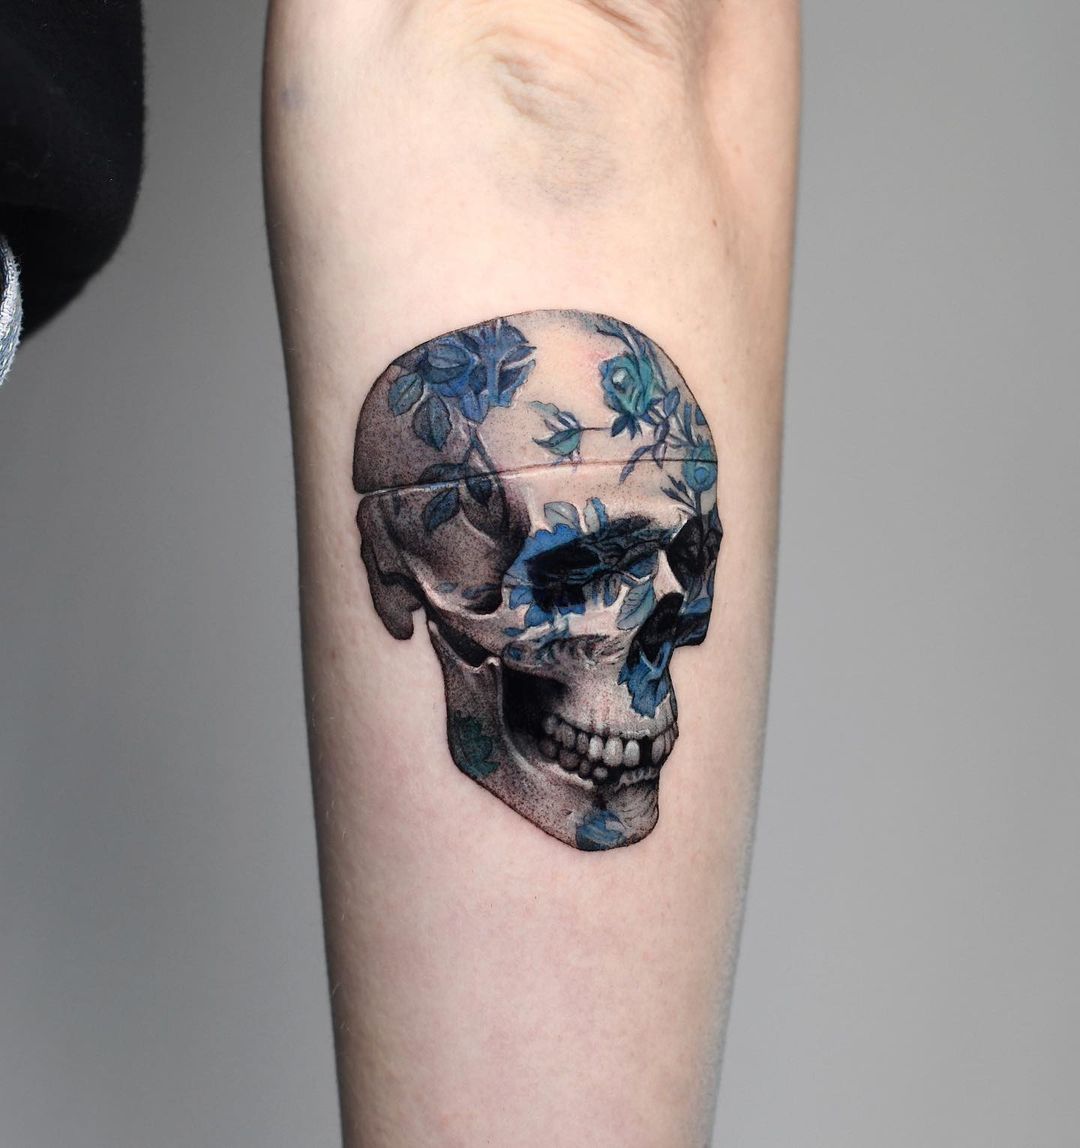 Colorful 3D Skull Tattoo on Arm